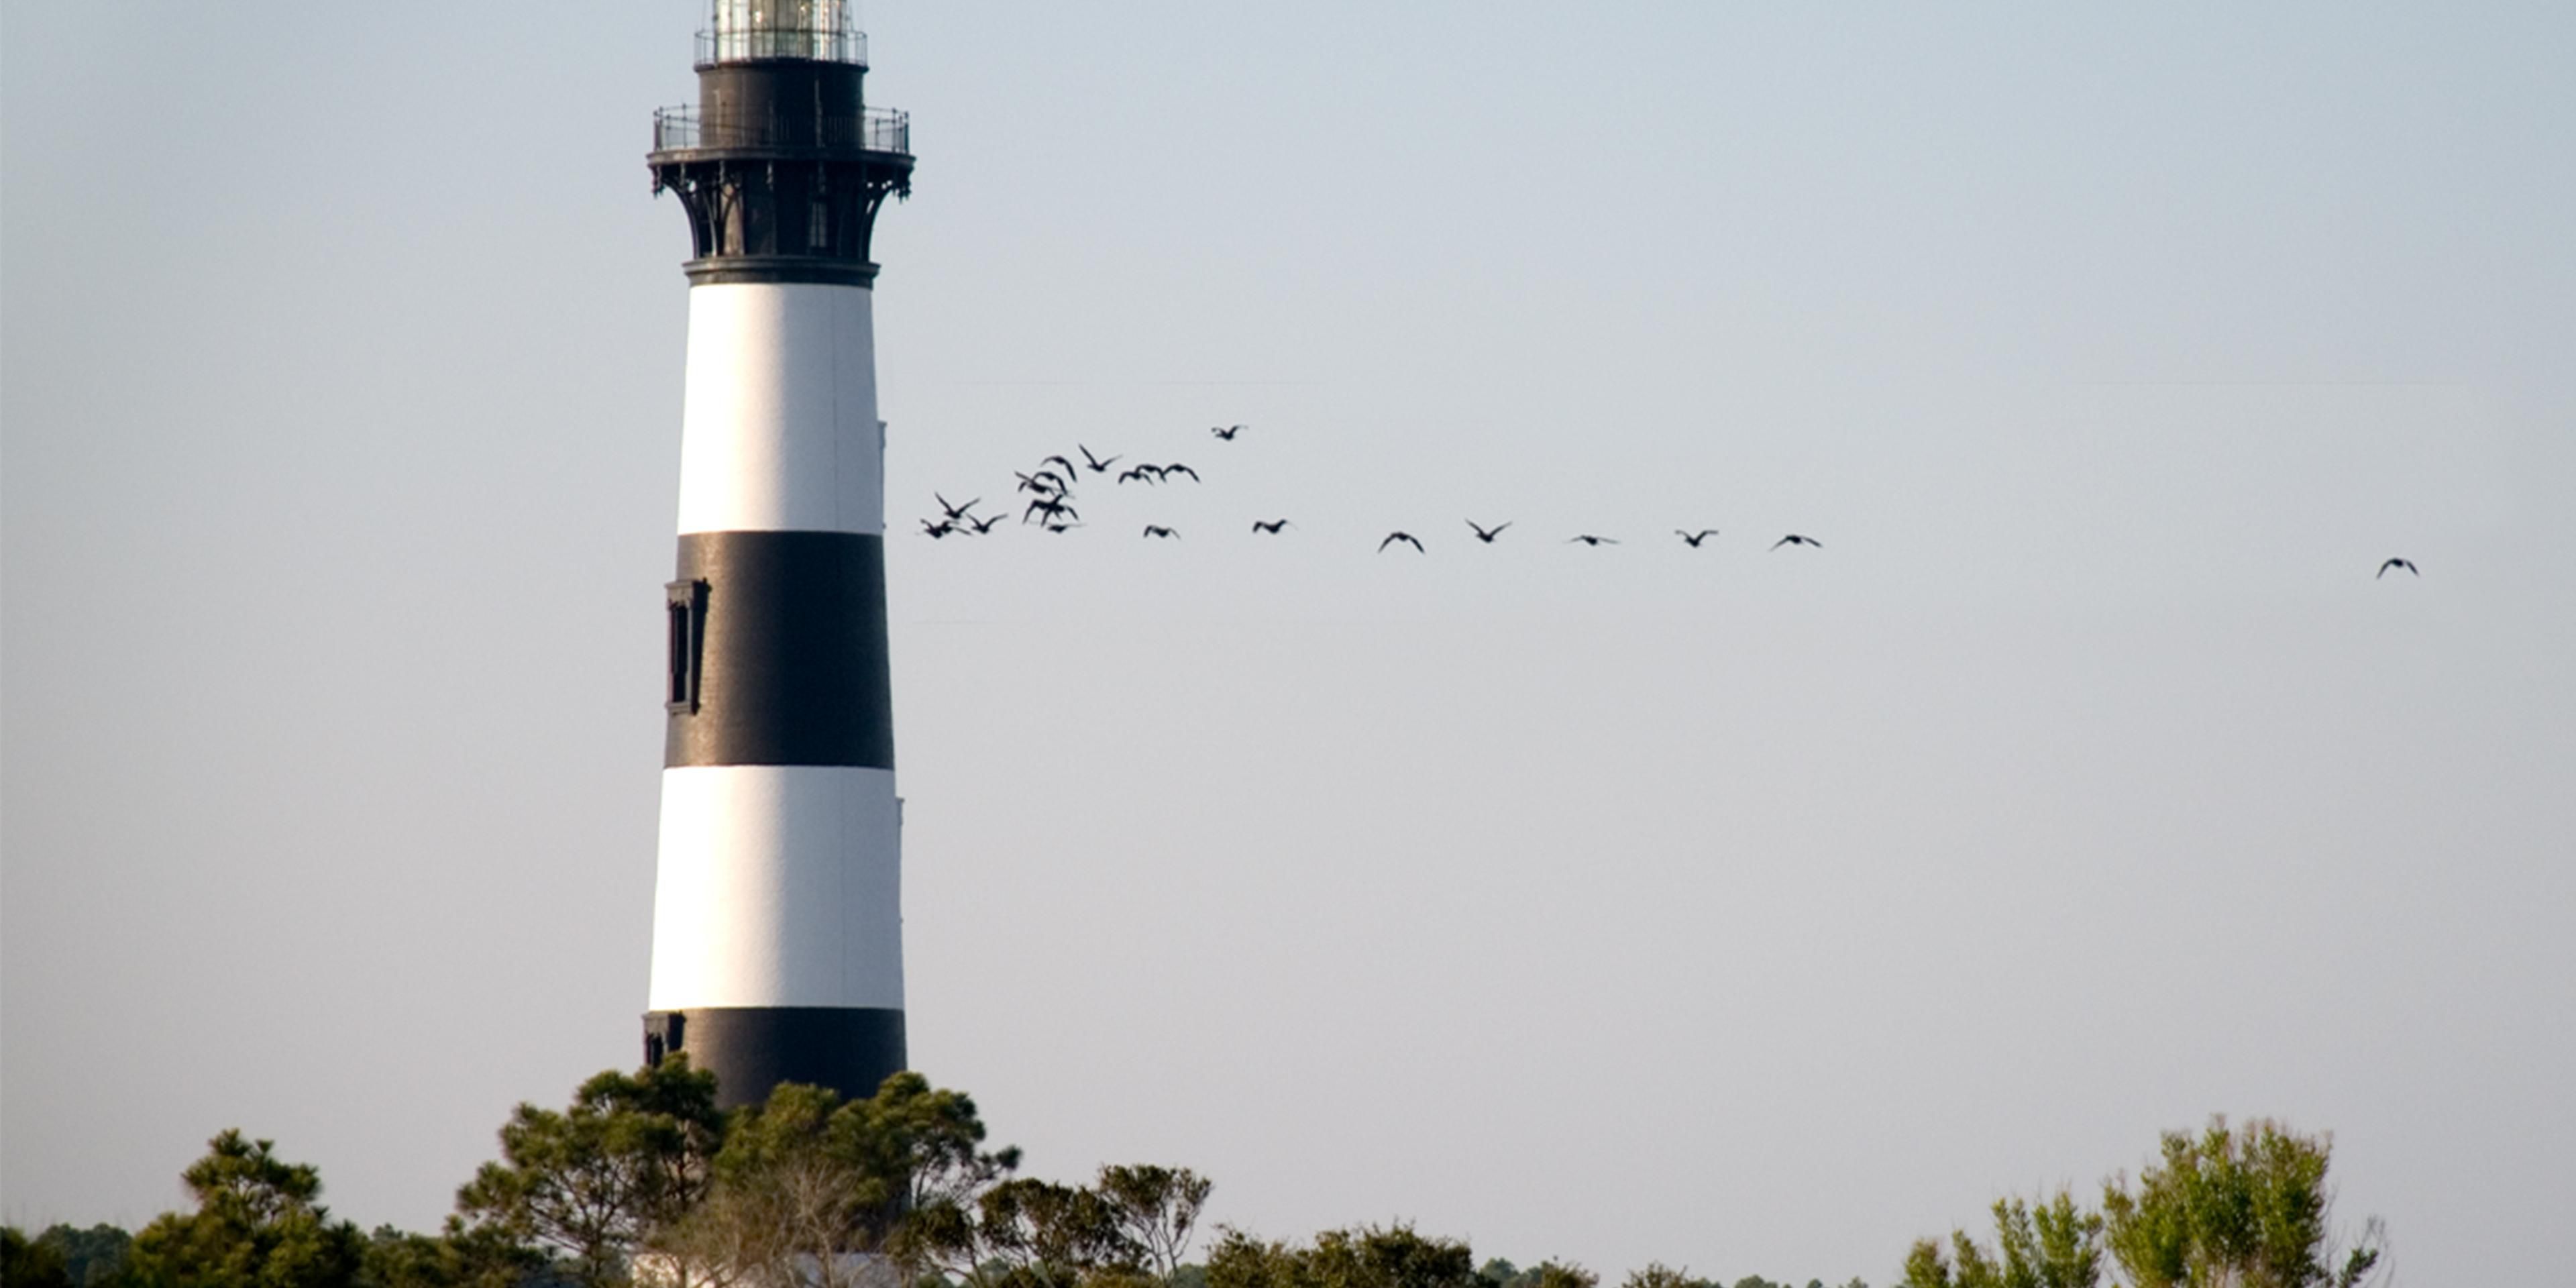 From Corolla to Ocracoke; the Five Outer Banks Lighthouses are historic landmarks and a must-see while visiting the OBX.
1. Cape Hatteras Lighthouse.  
2. Currituck Beach Lighthouse.  
3. Bodie Island Lighthouse.  
4. Roanoke Marshes Lighthouse.  
5. Ocracoke Lighthouse.